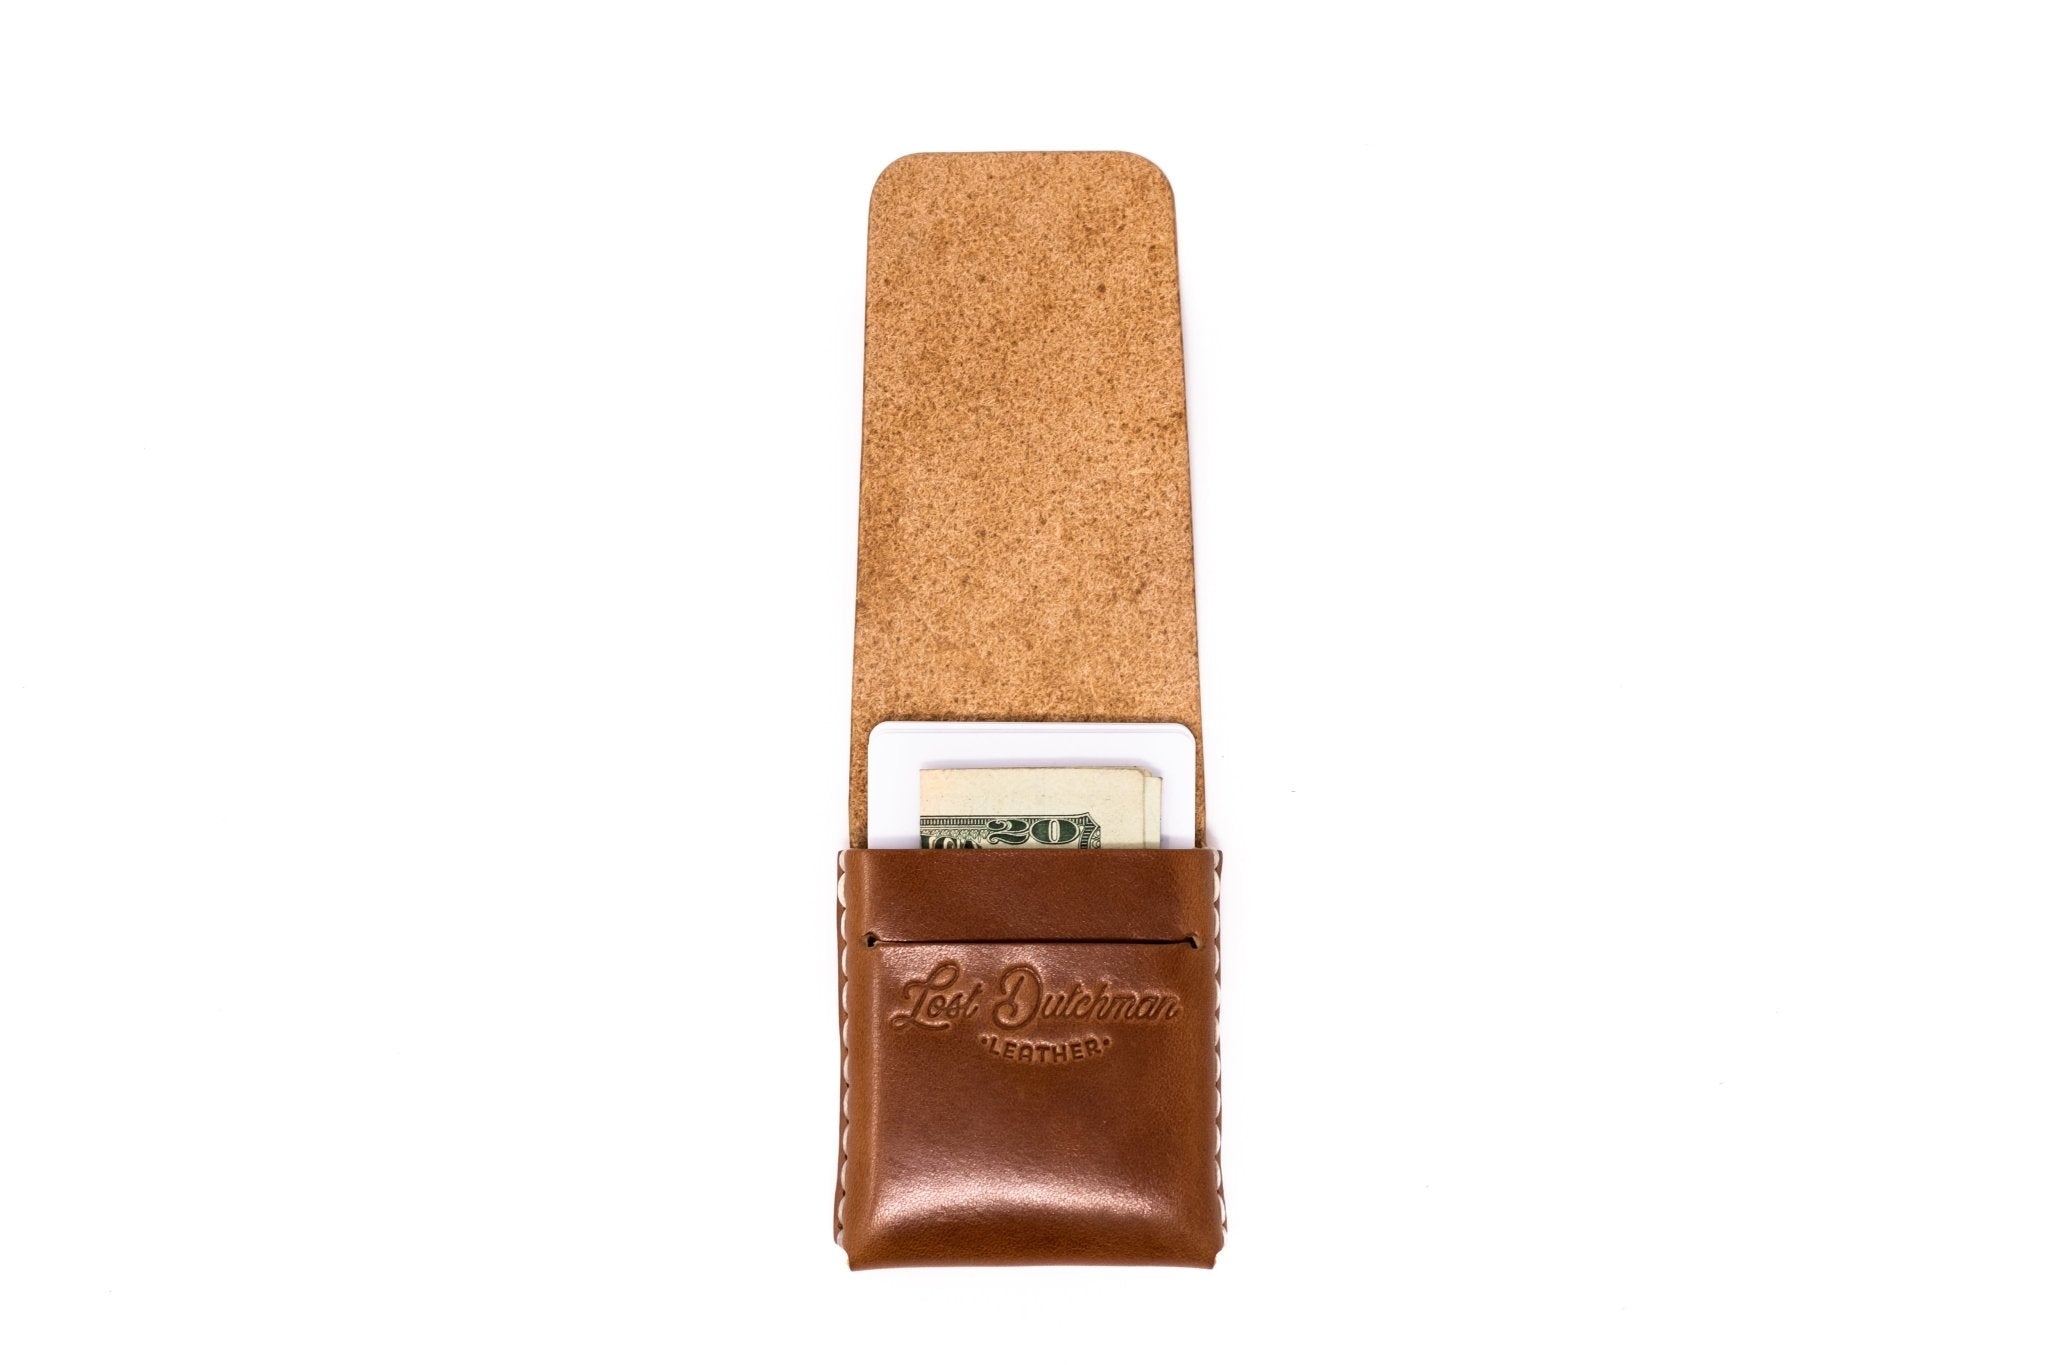 The Thin Finn - Lost Dutchman Leather handmade leather wallets